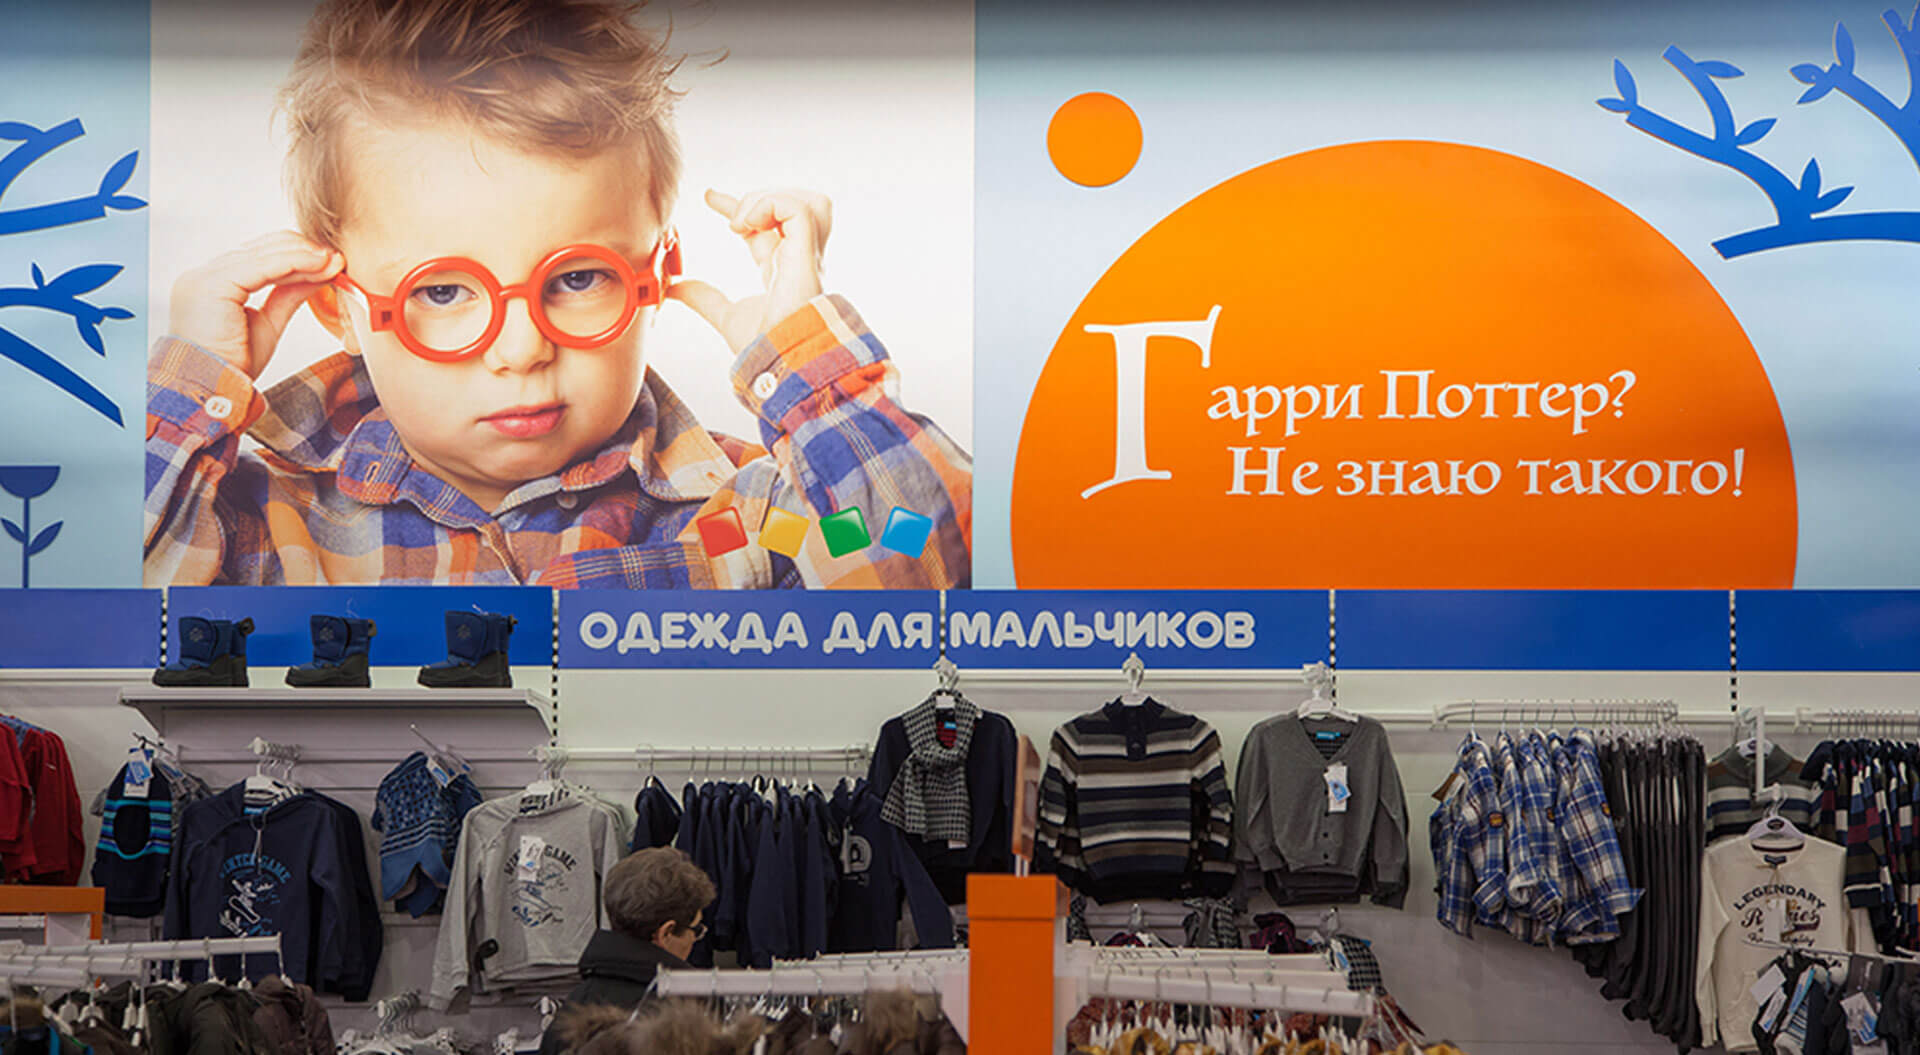 Detskiy Mir Russia best internal department branding, store interior design, concepts for toys and children's fashion